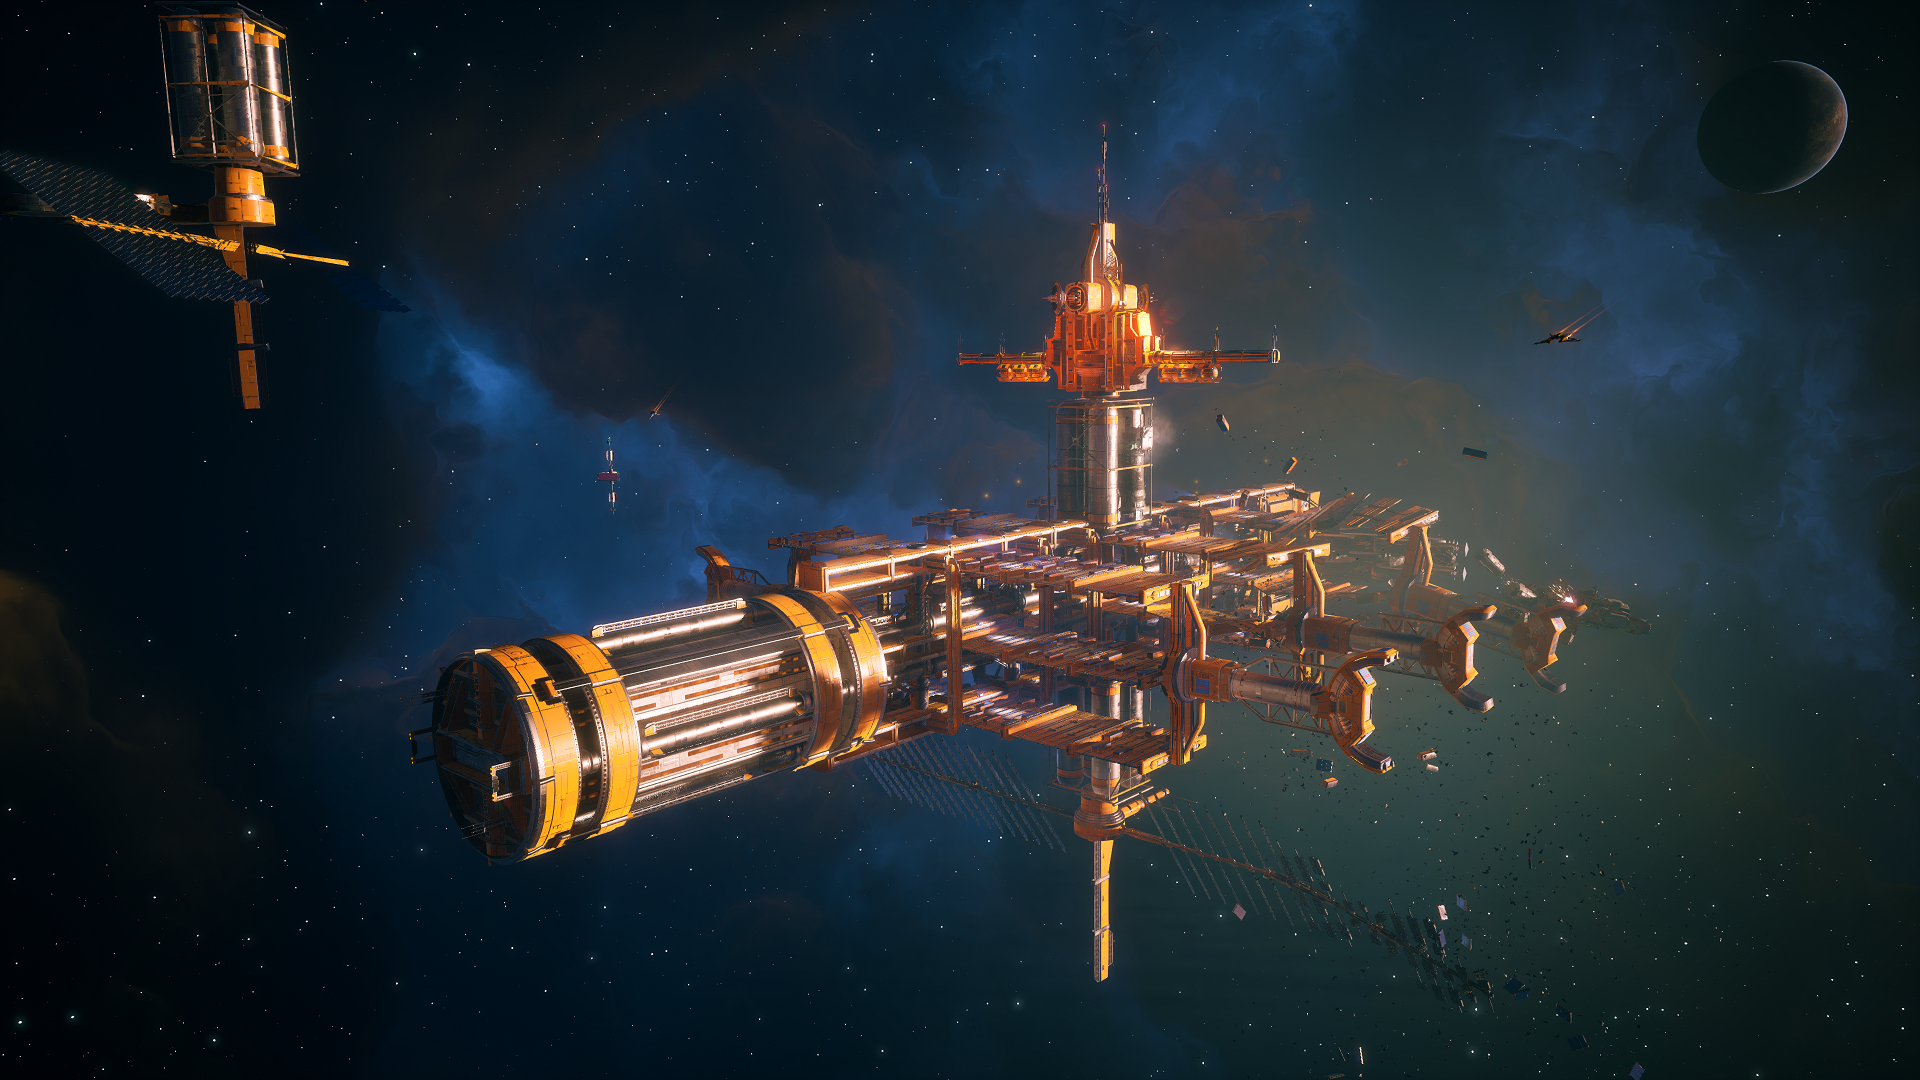 Everspace 2 tops 400k units sold, also attracting over 1 million